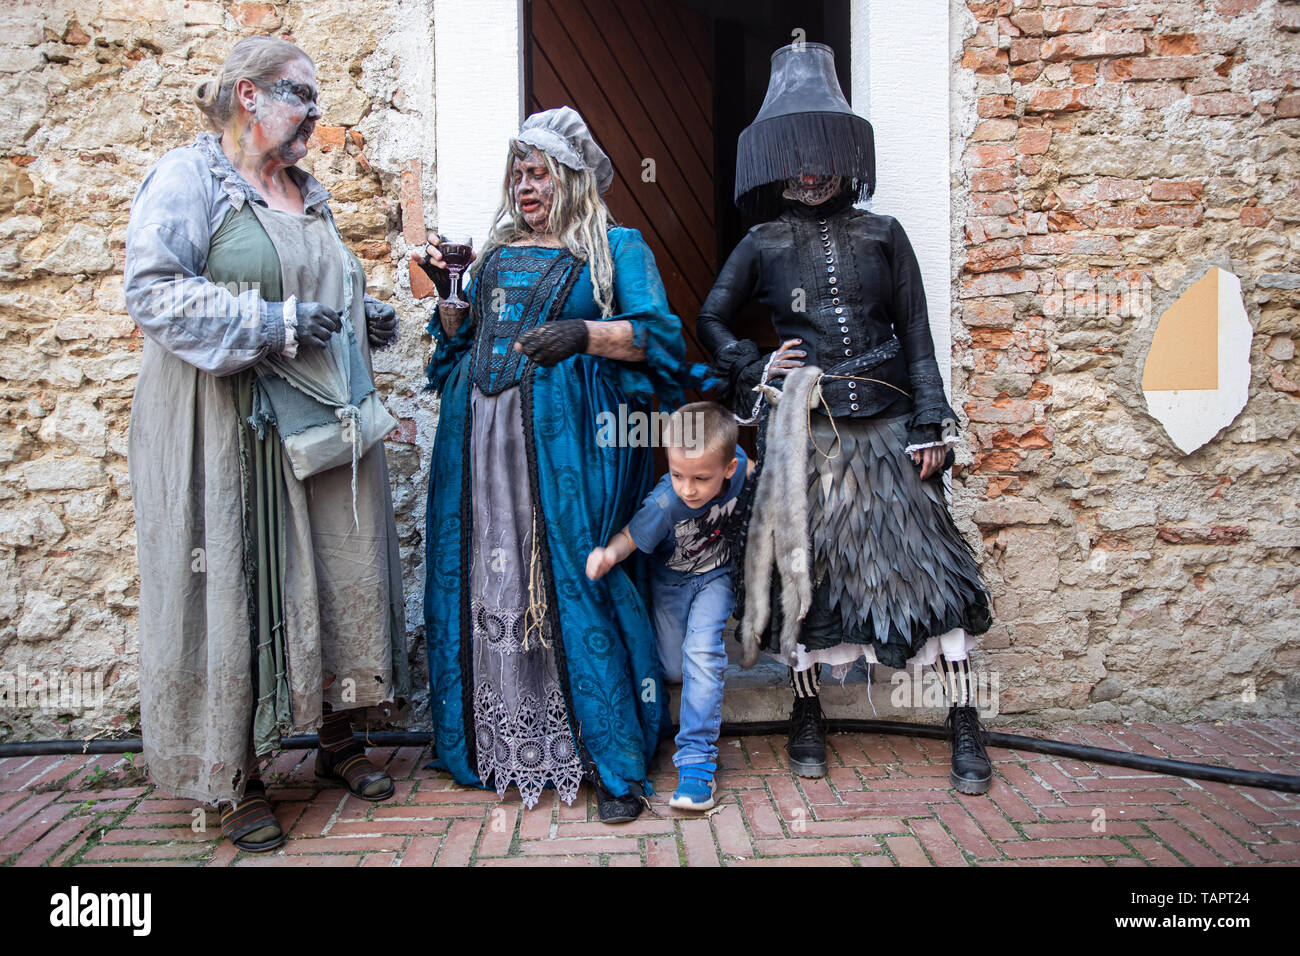 (190527) -- BEIJING, May 27, 2019 (Xinhua) -- Women dressed as witches participate in the Perunfest, a festival dedicated to forgotten stories and folktales from ancient ages, at Lukavec Castle in Lukavec, Croatia, May 25, 2019. (Xinhua/Davor Puklavec) Stock Photo